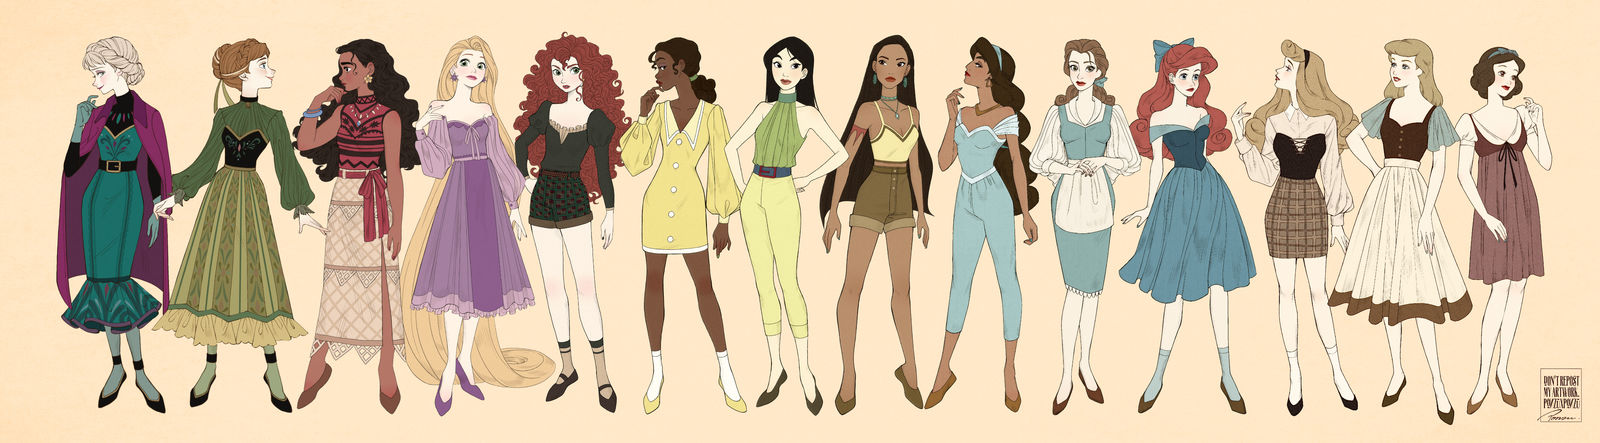 Disney Outfits